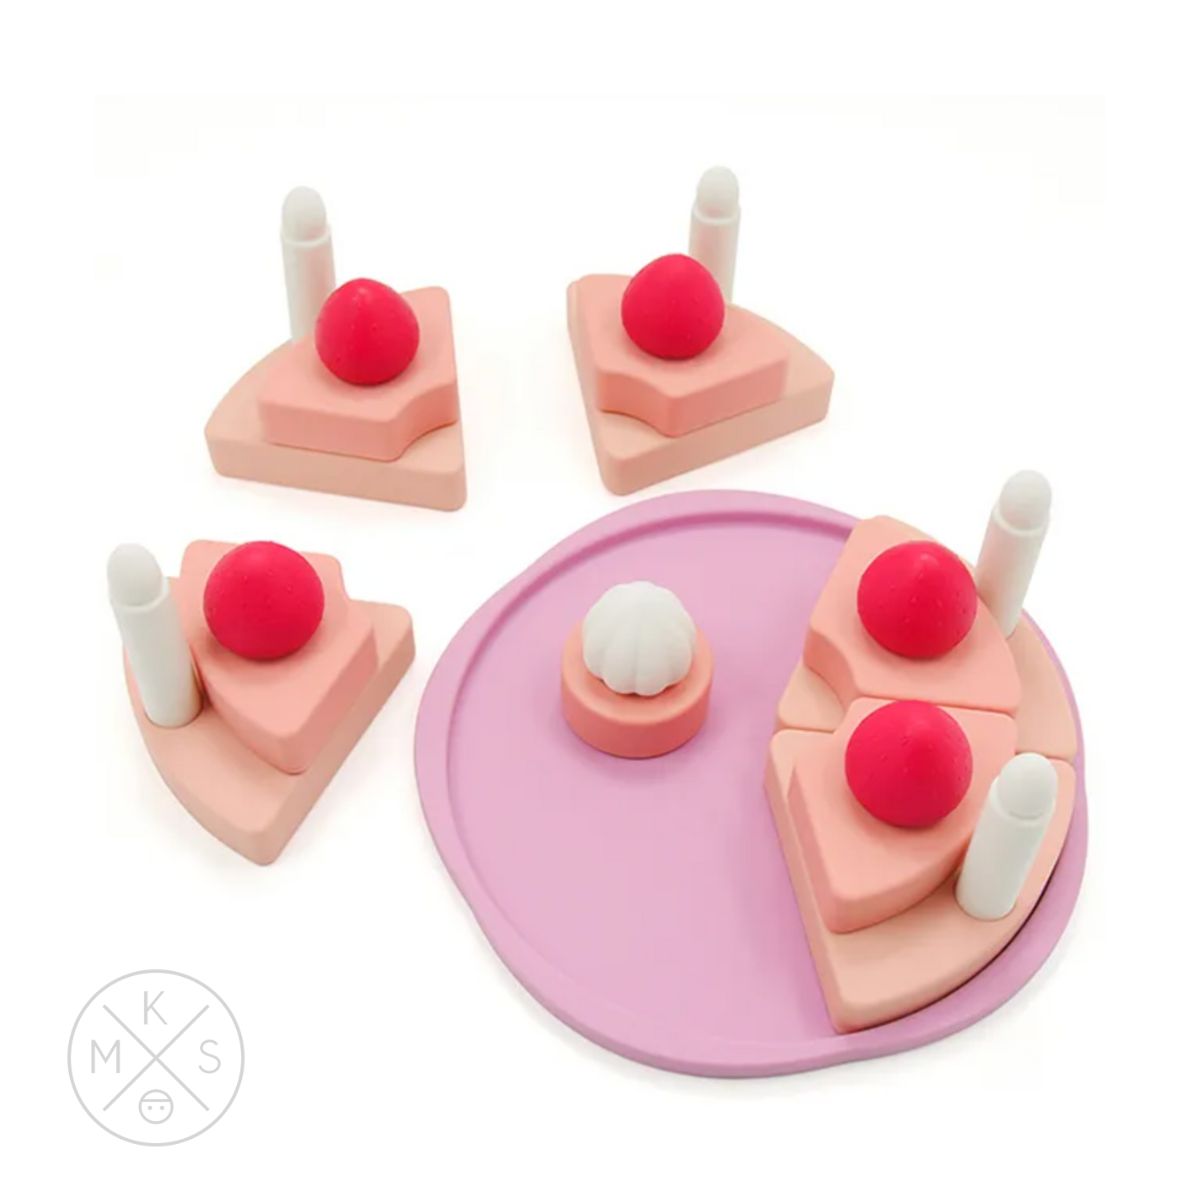 A pink Silicone Strawberry Cake Pretend Play Stacker with strawberries and candles to chew on by babies or pretend play birthday cake toy MKS Miminoo.